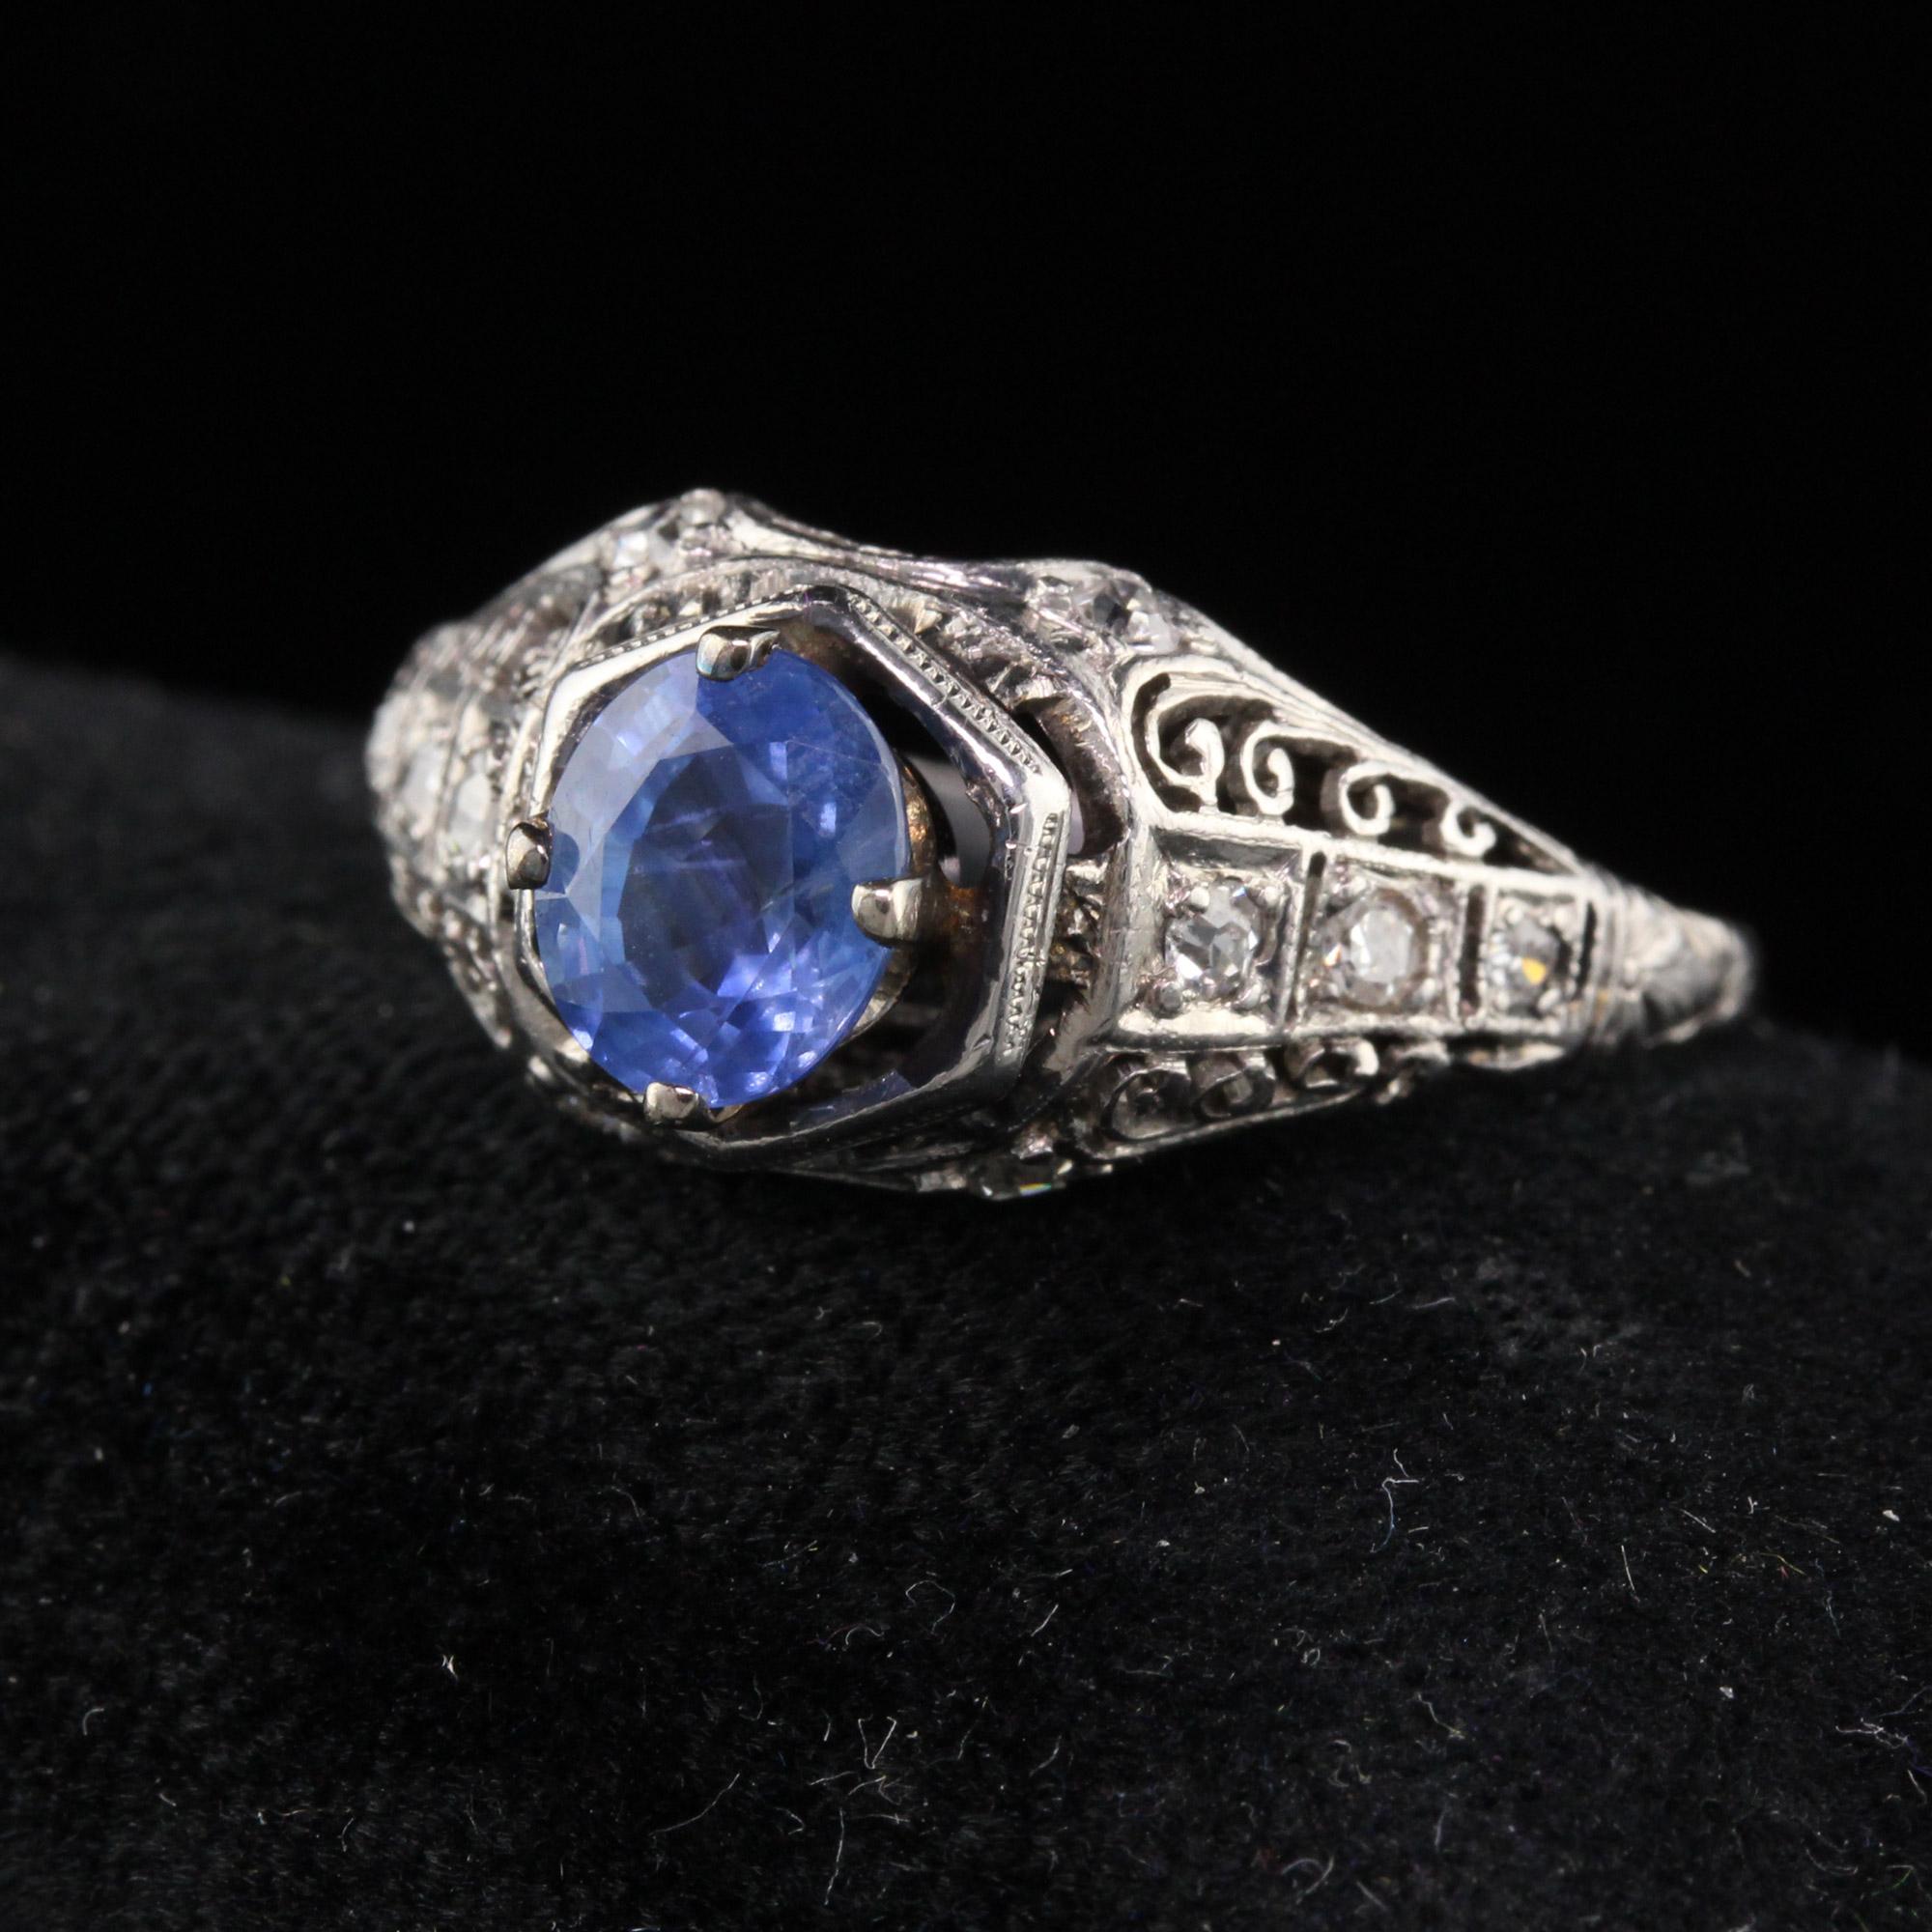 Unique Art Deco Platinum Diamond Engagement ring with an oval ceylon sapphire center.

#R0187

Metal: Platinum

Weight: 3.9 Grams

Sapphire Measurements: 6.9 x 5.7 mm

Total Diamond Weight: Approximately 0.20 cts single cut diamonds

Ring Size: 6.5